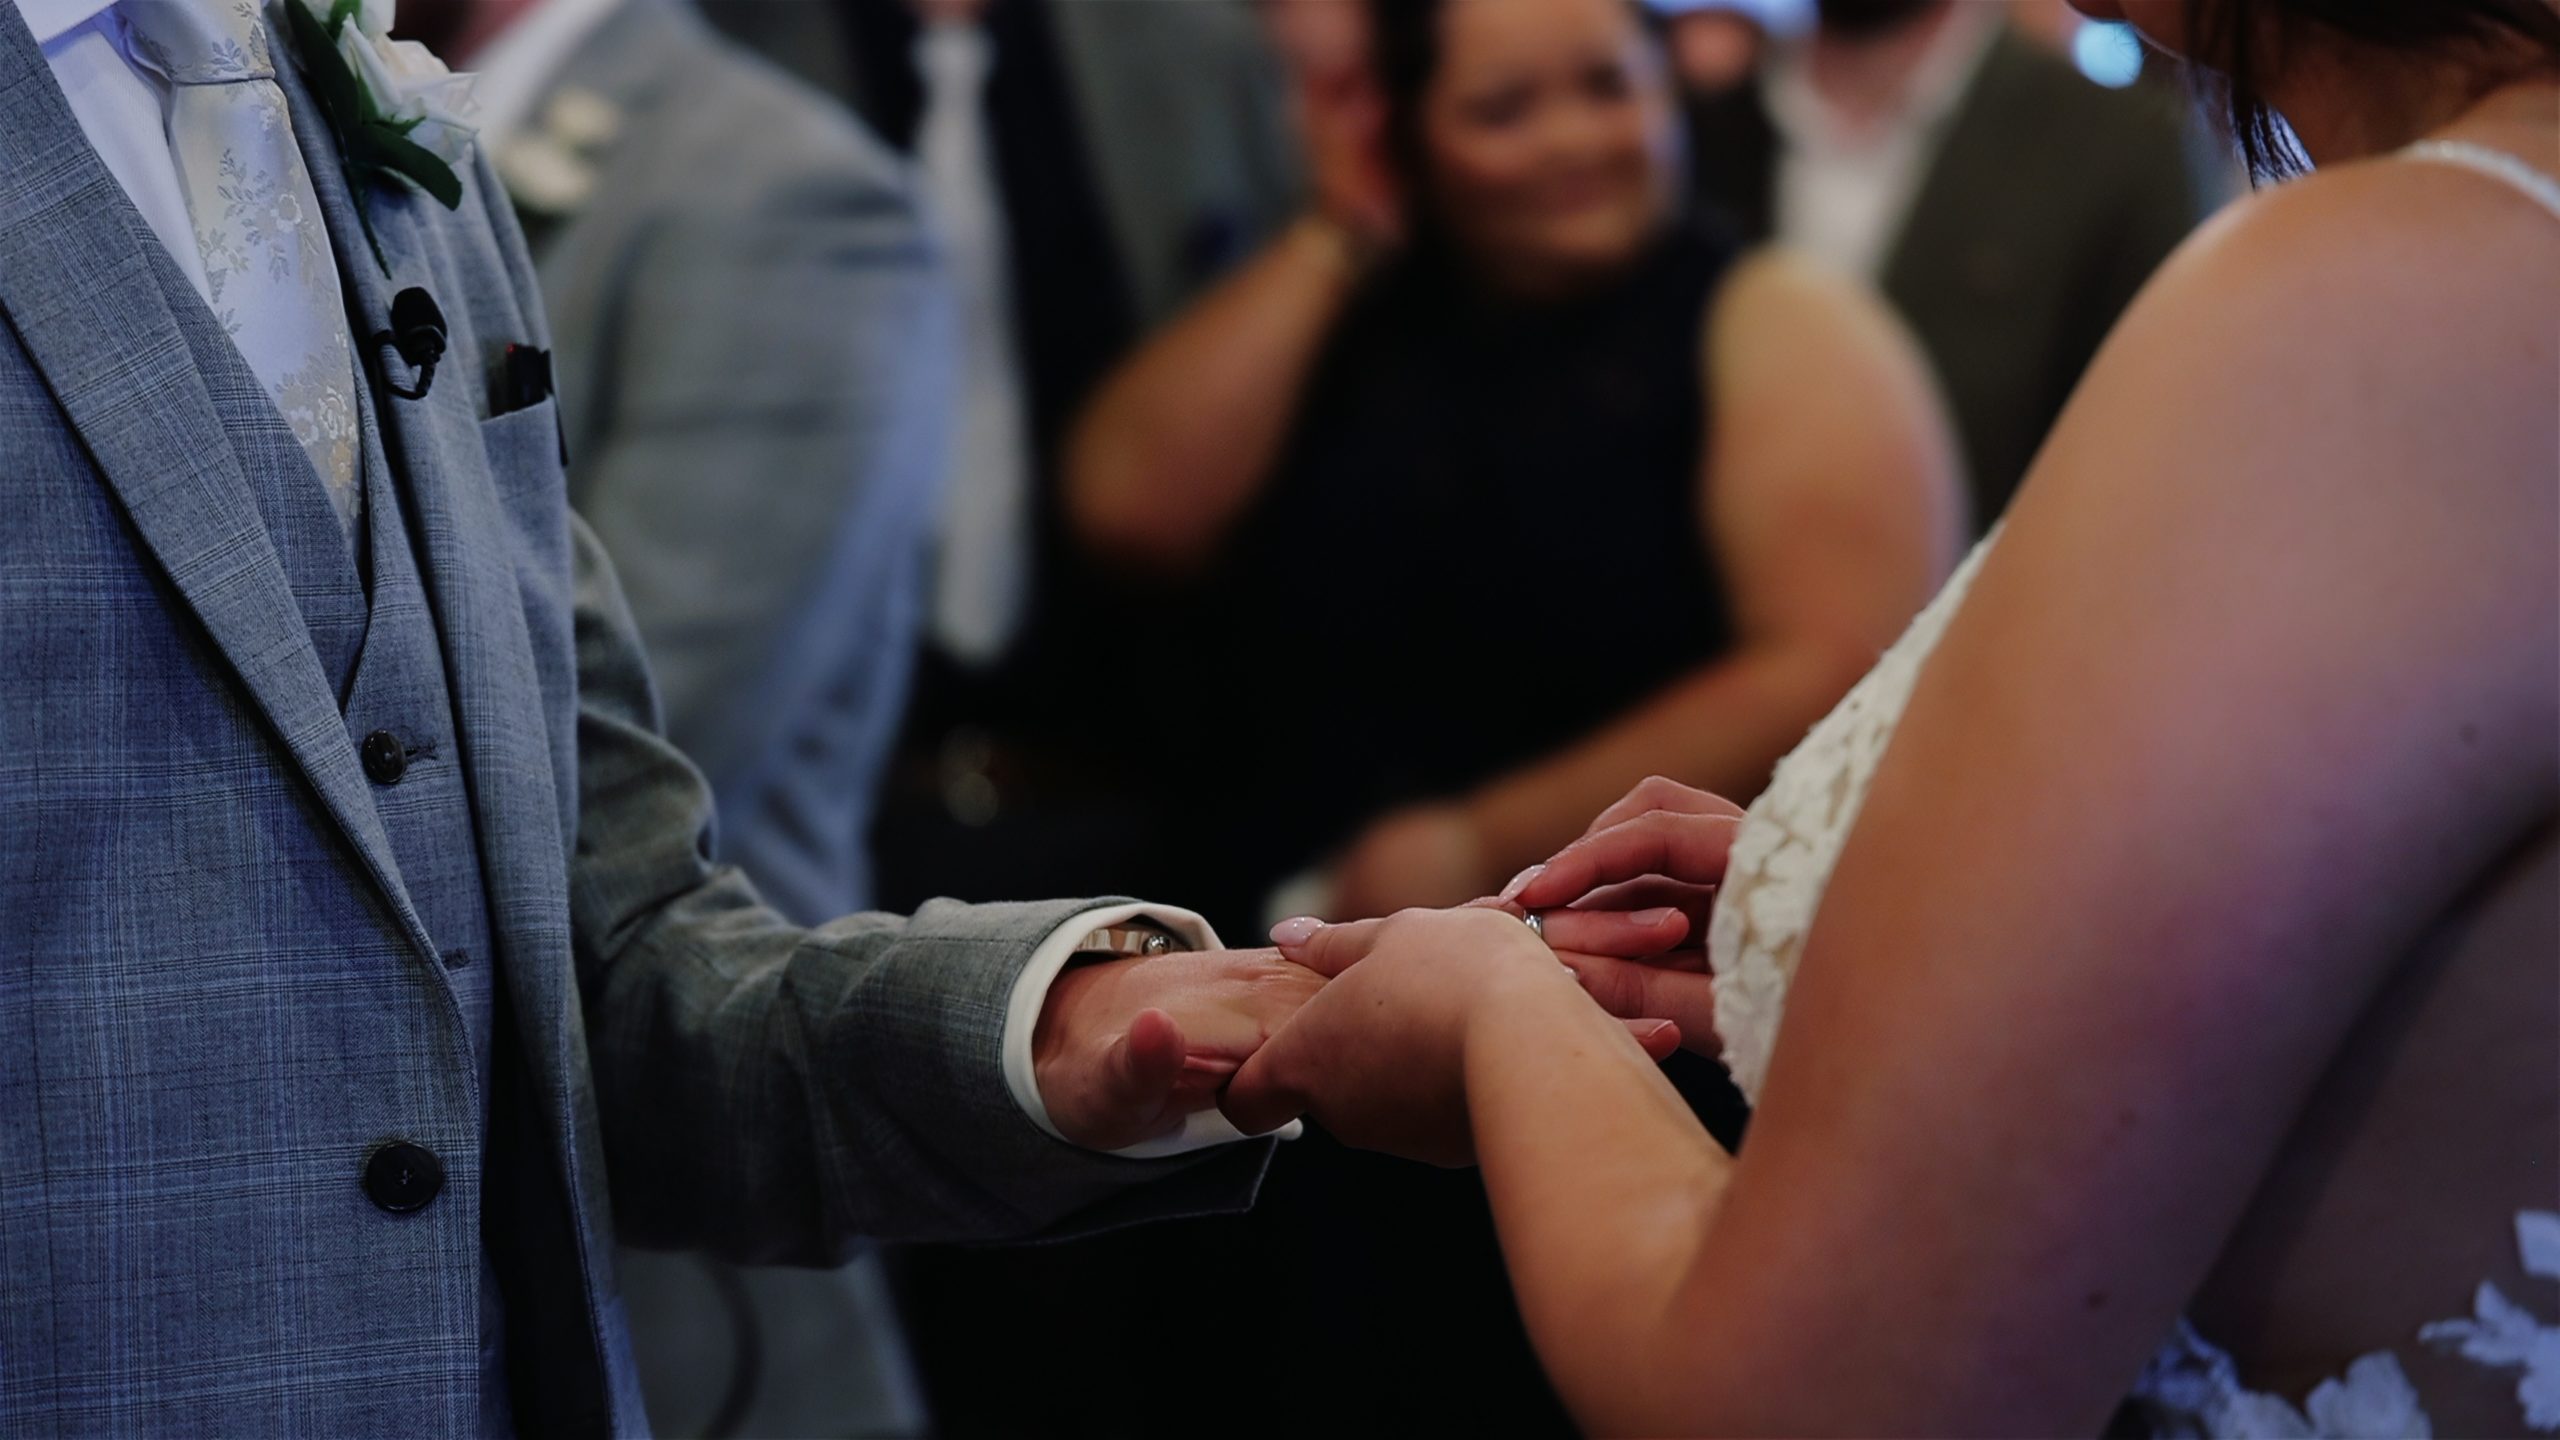 A close up of a bride placing a ring on the grooms finger